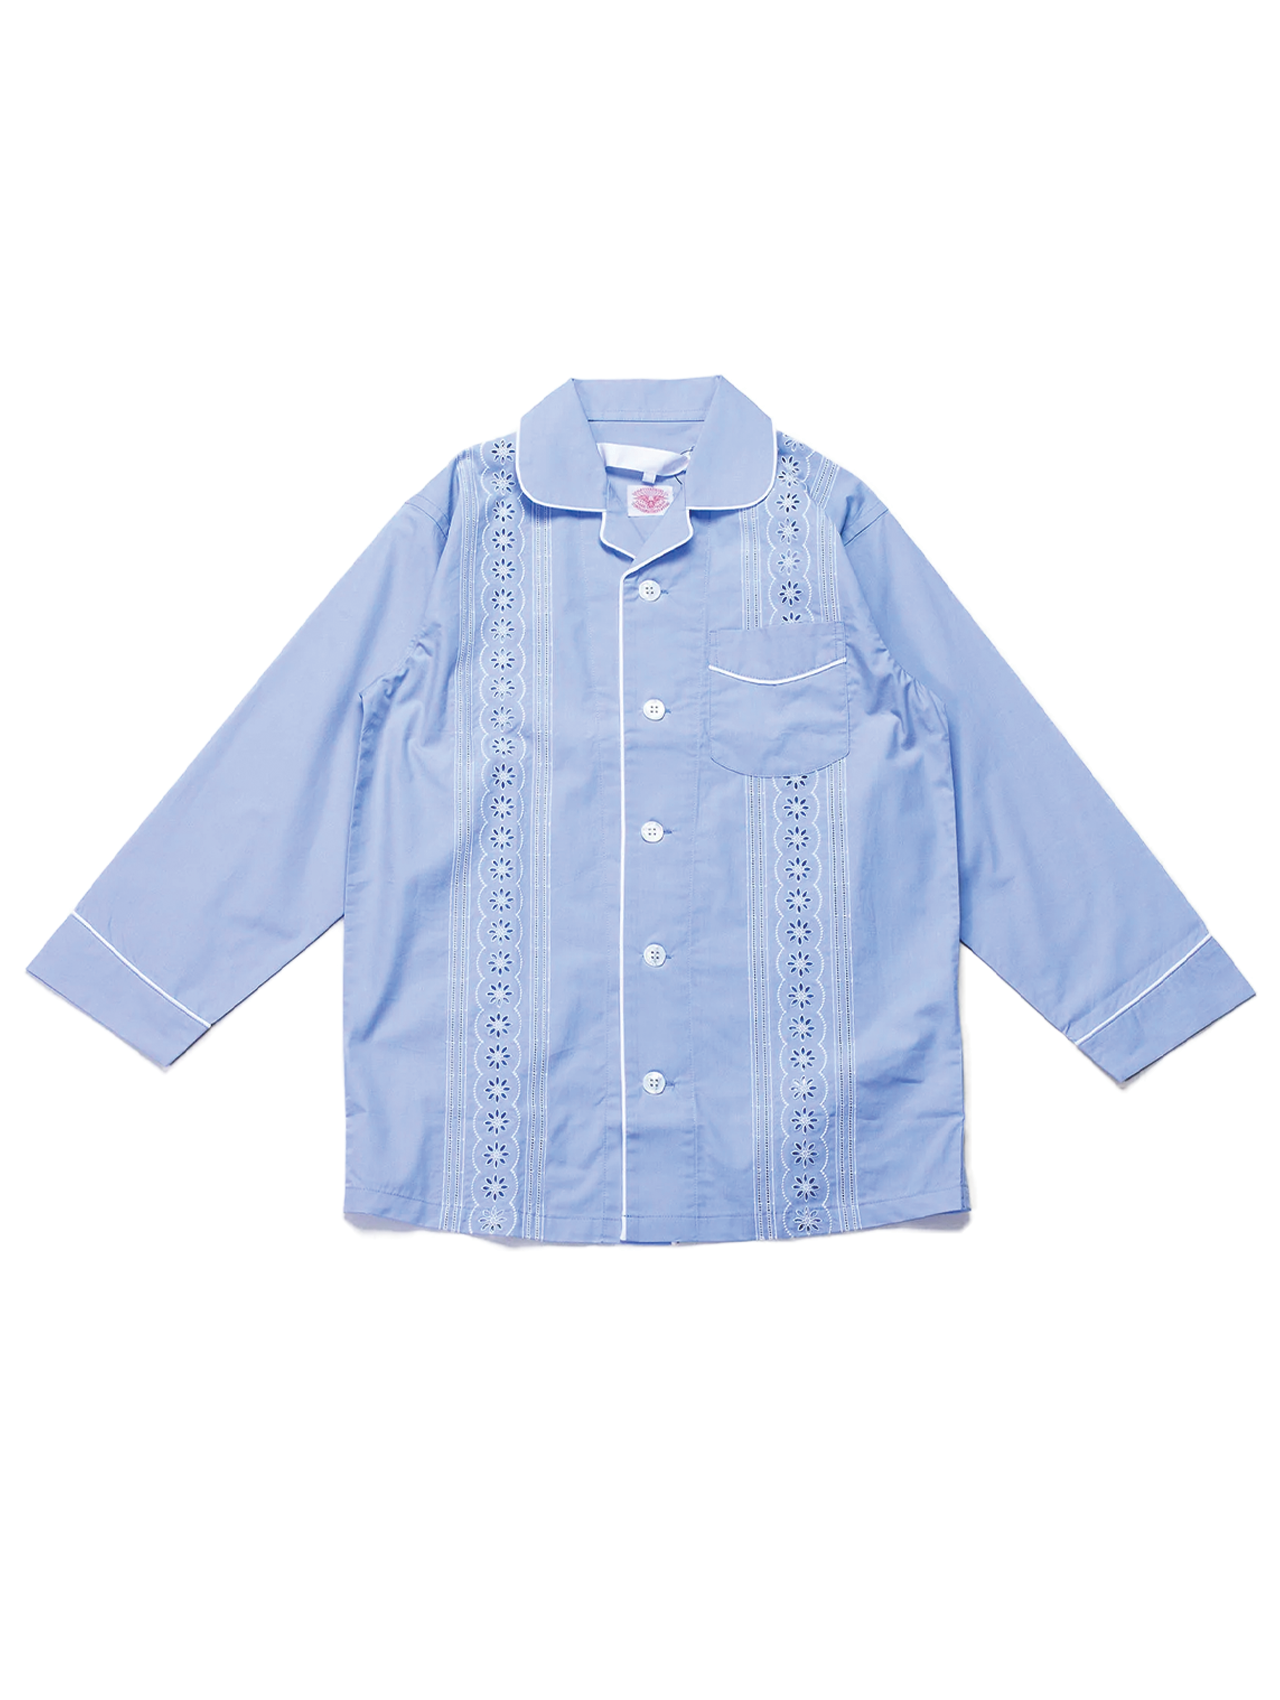 CDG TAO Blue Embroidered Blouse